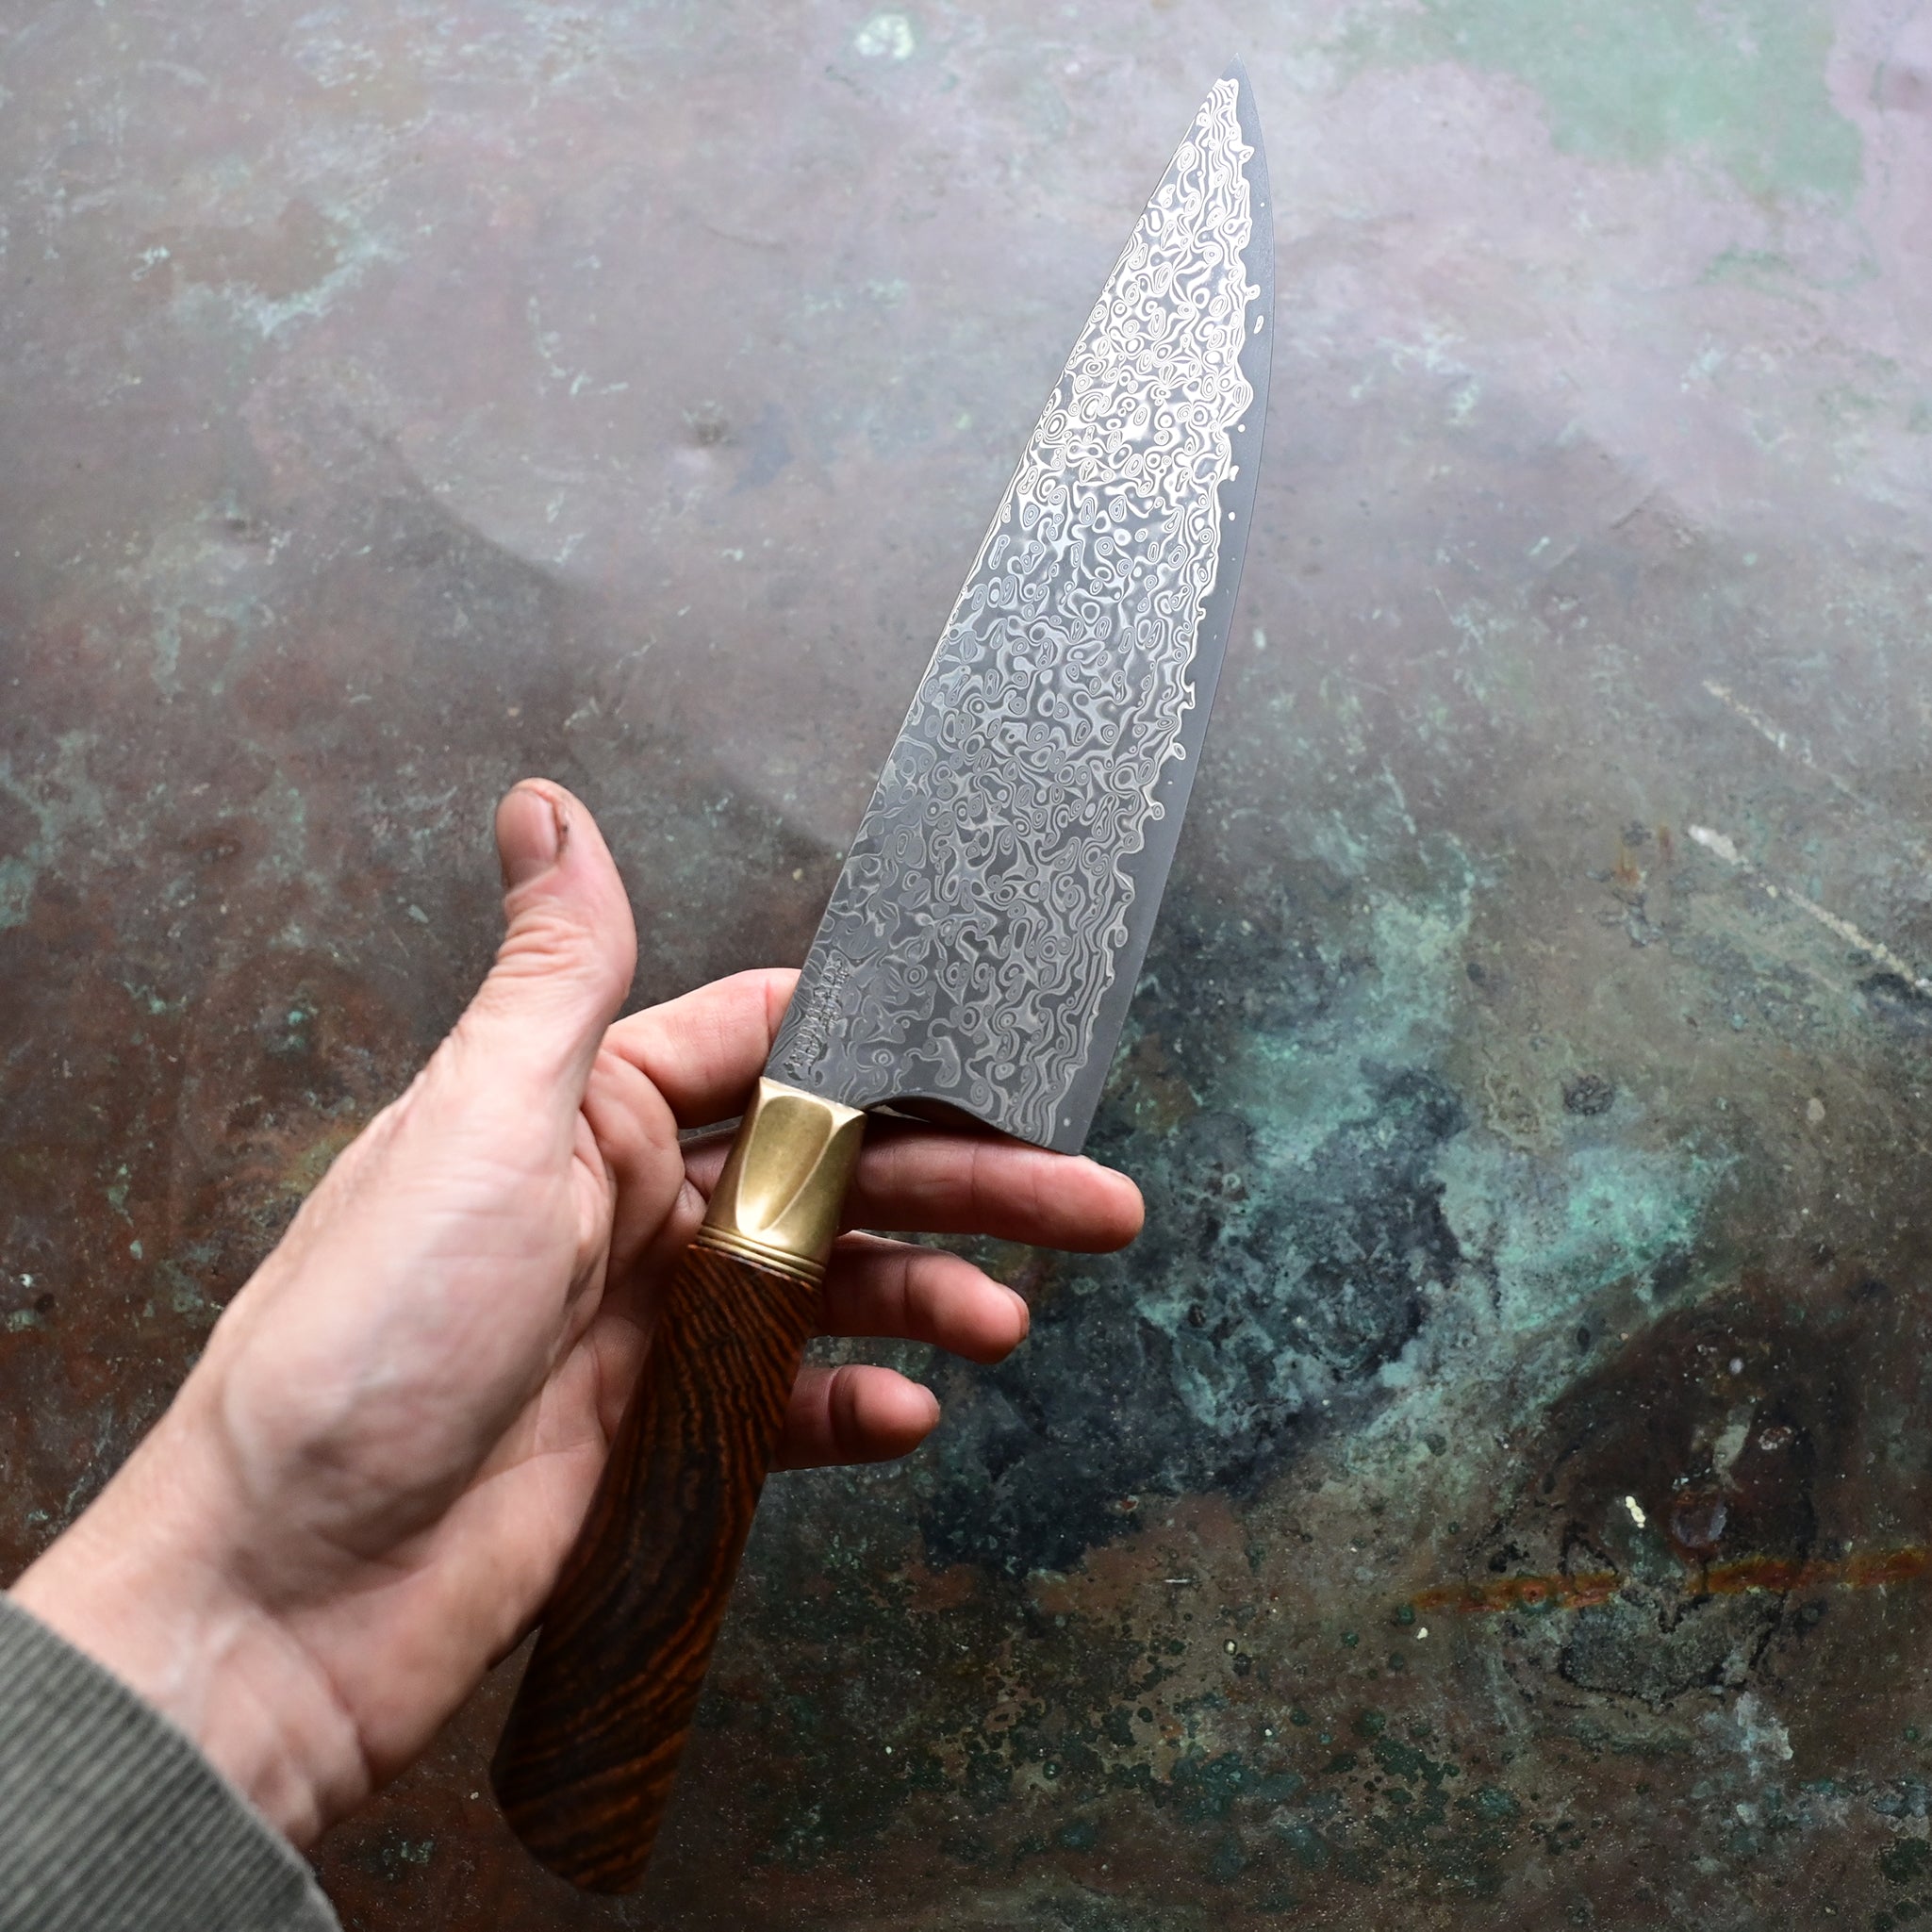 A Santoku knife with a starfall Damascus pattern, natural bronze bolster, and stabilized golden Buckeye burl handle, on a concrete backdrop